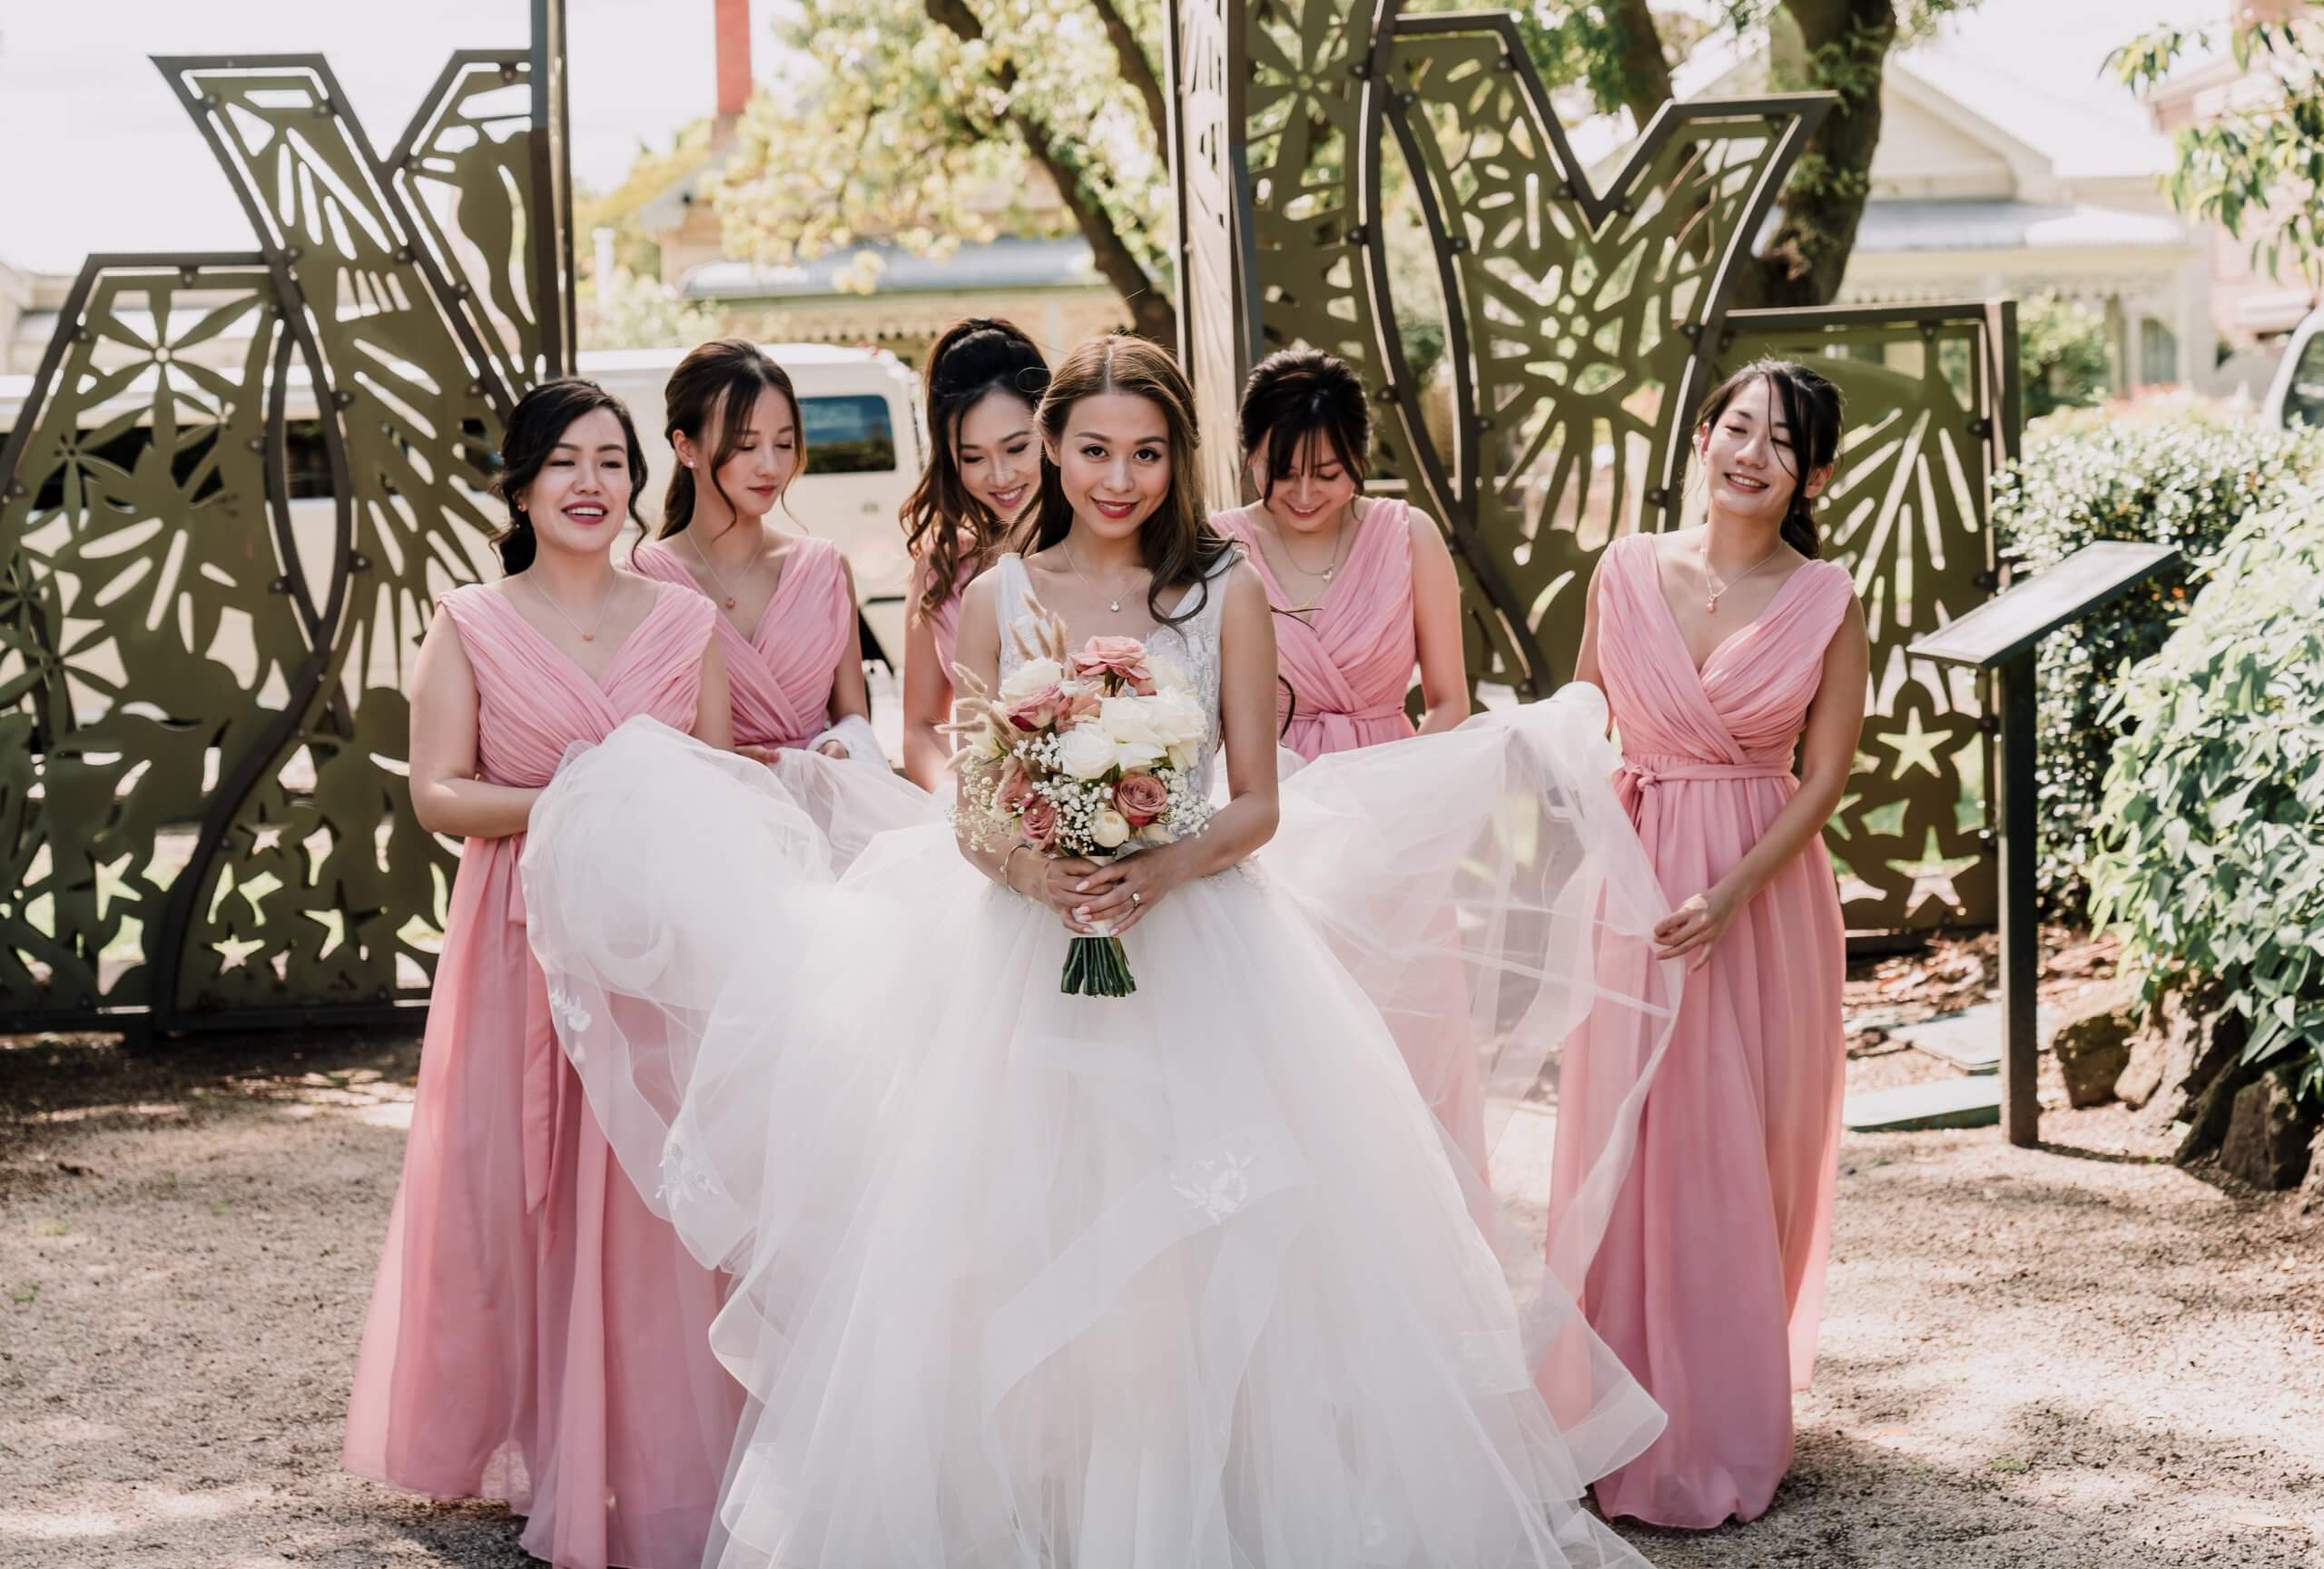 The brides smiles towards the camera while her five bridesmaids hold the trail of her gown